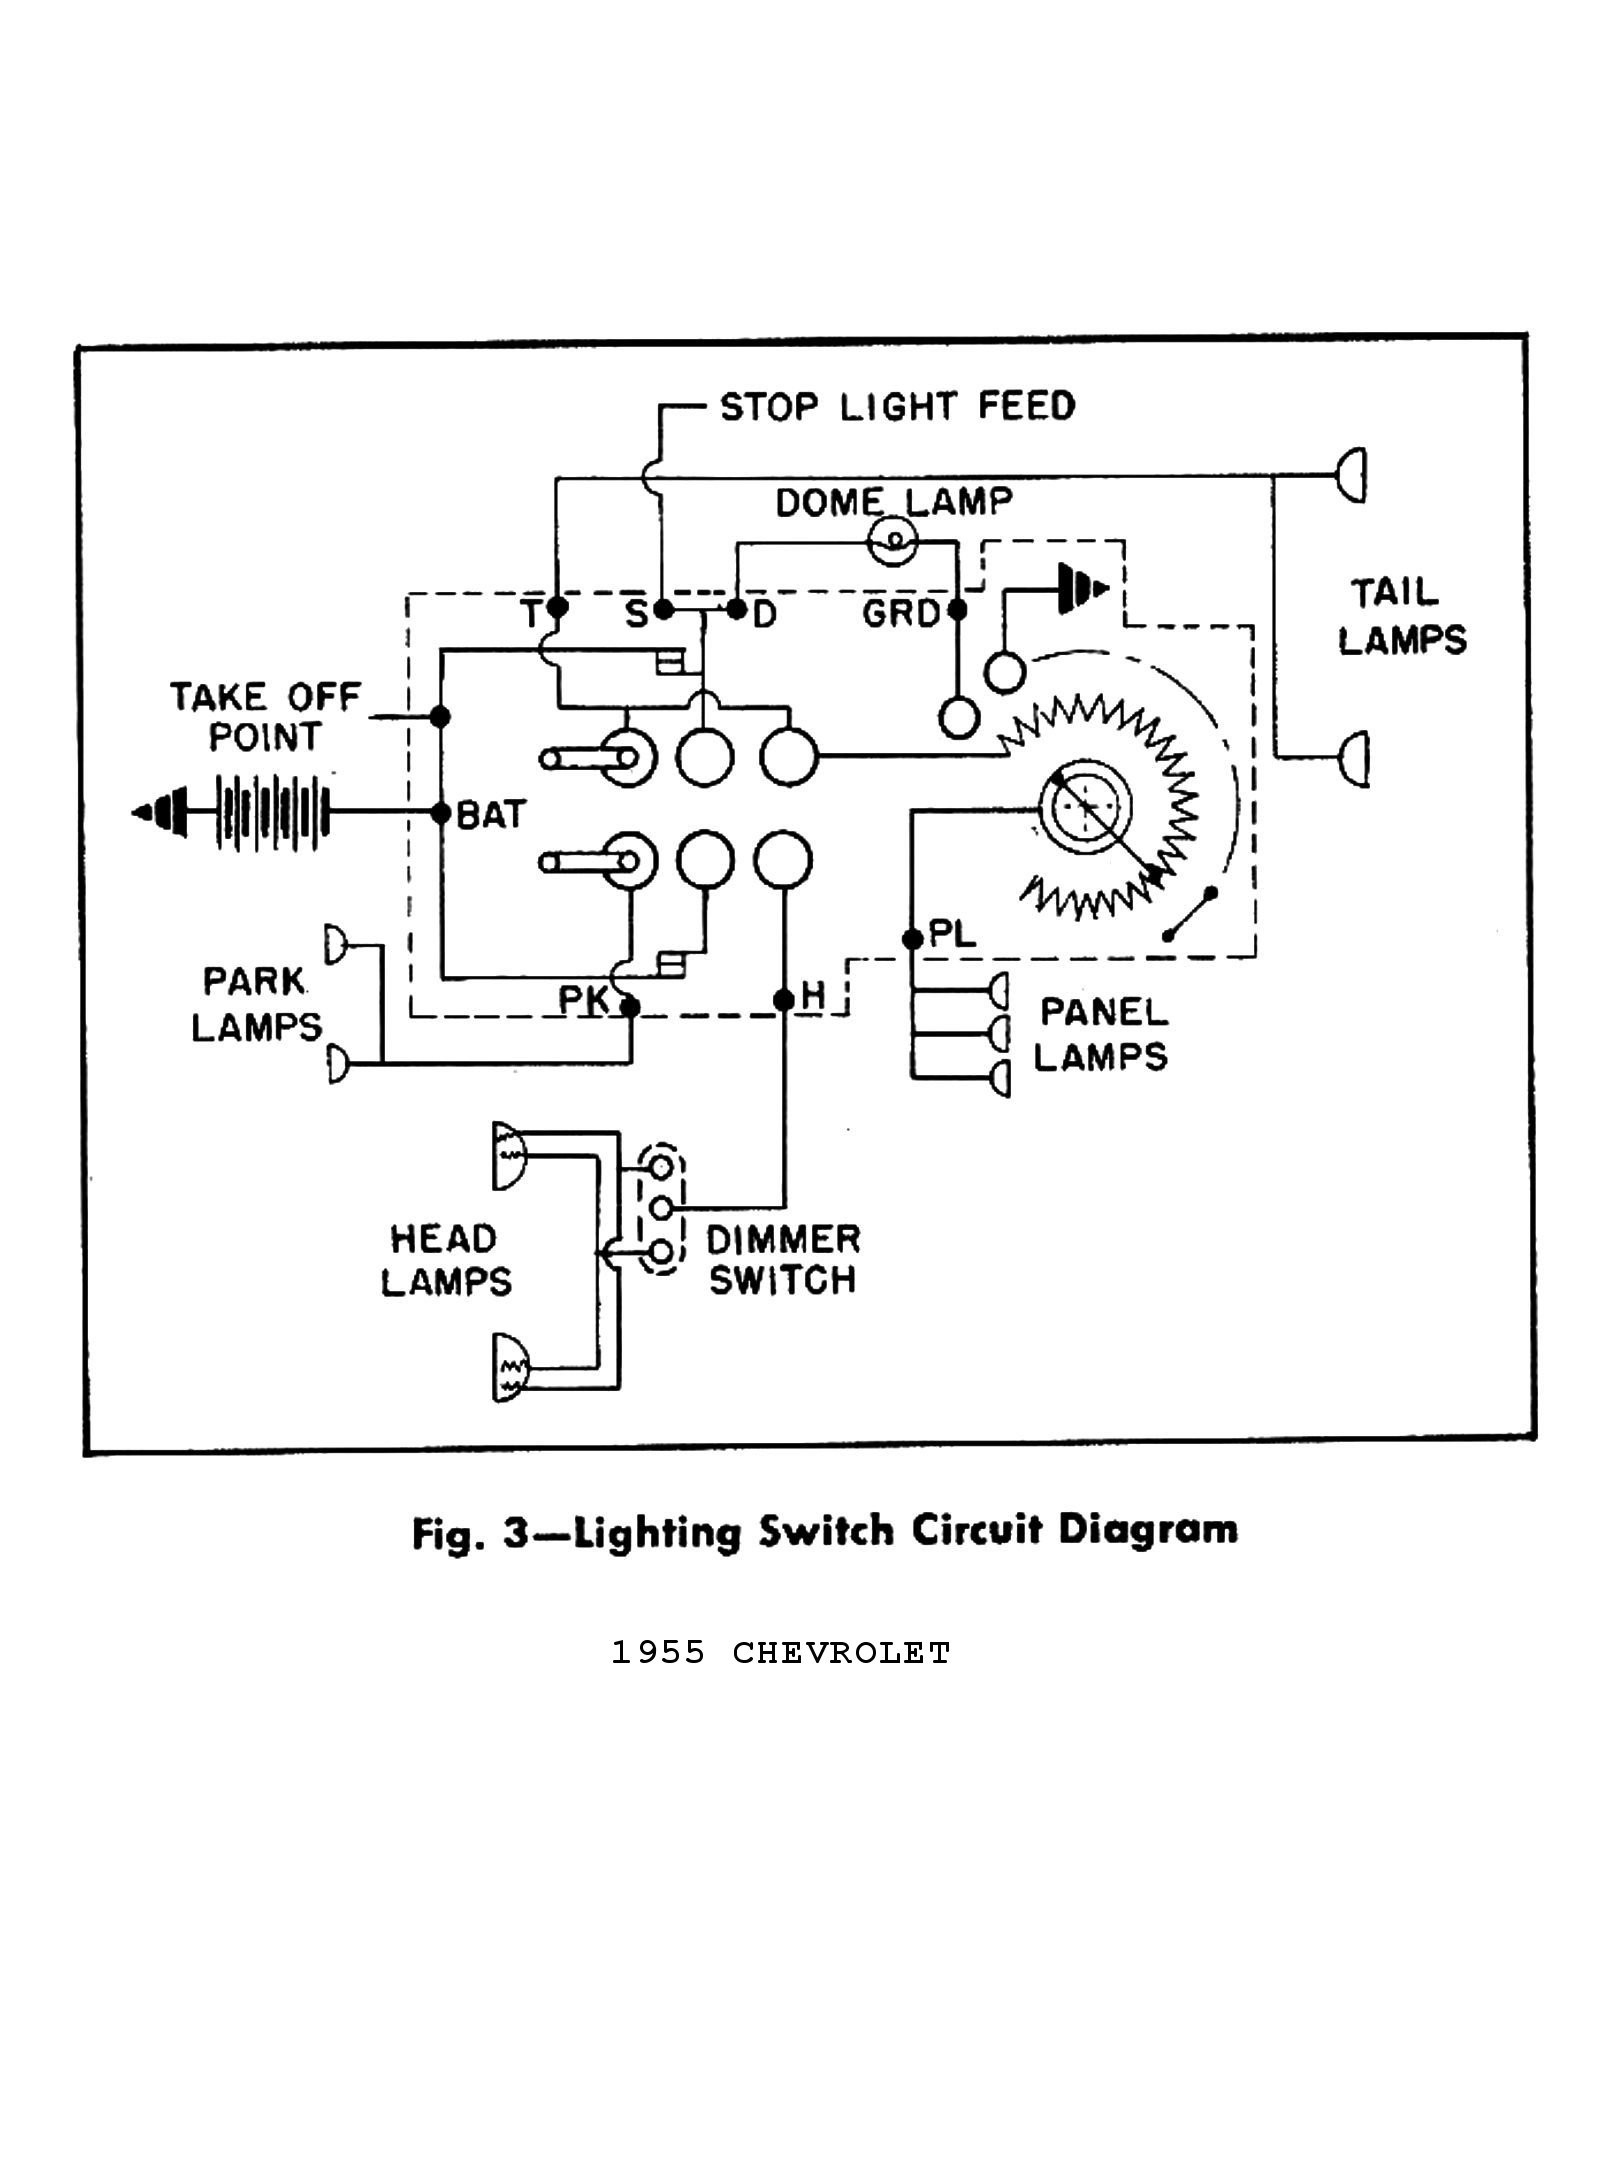 Headlight Switch Wiring Diagram Best Of 67 Rs Doors - Wellread - Headlight Switch Wiring Diagram Chevy Truck